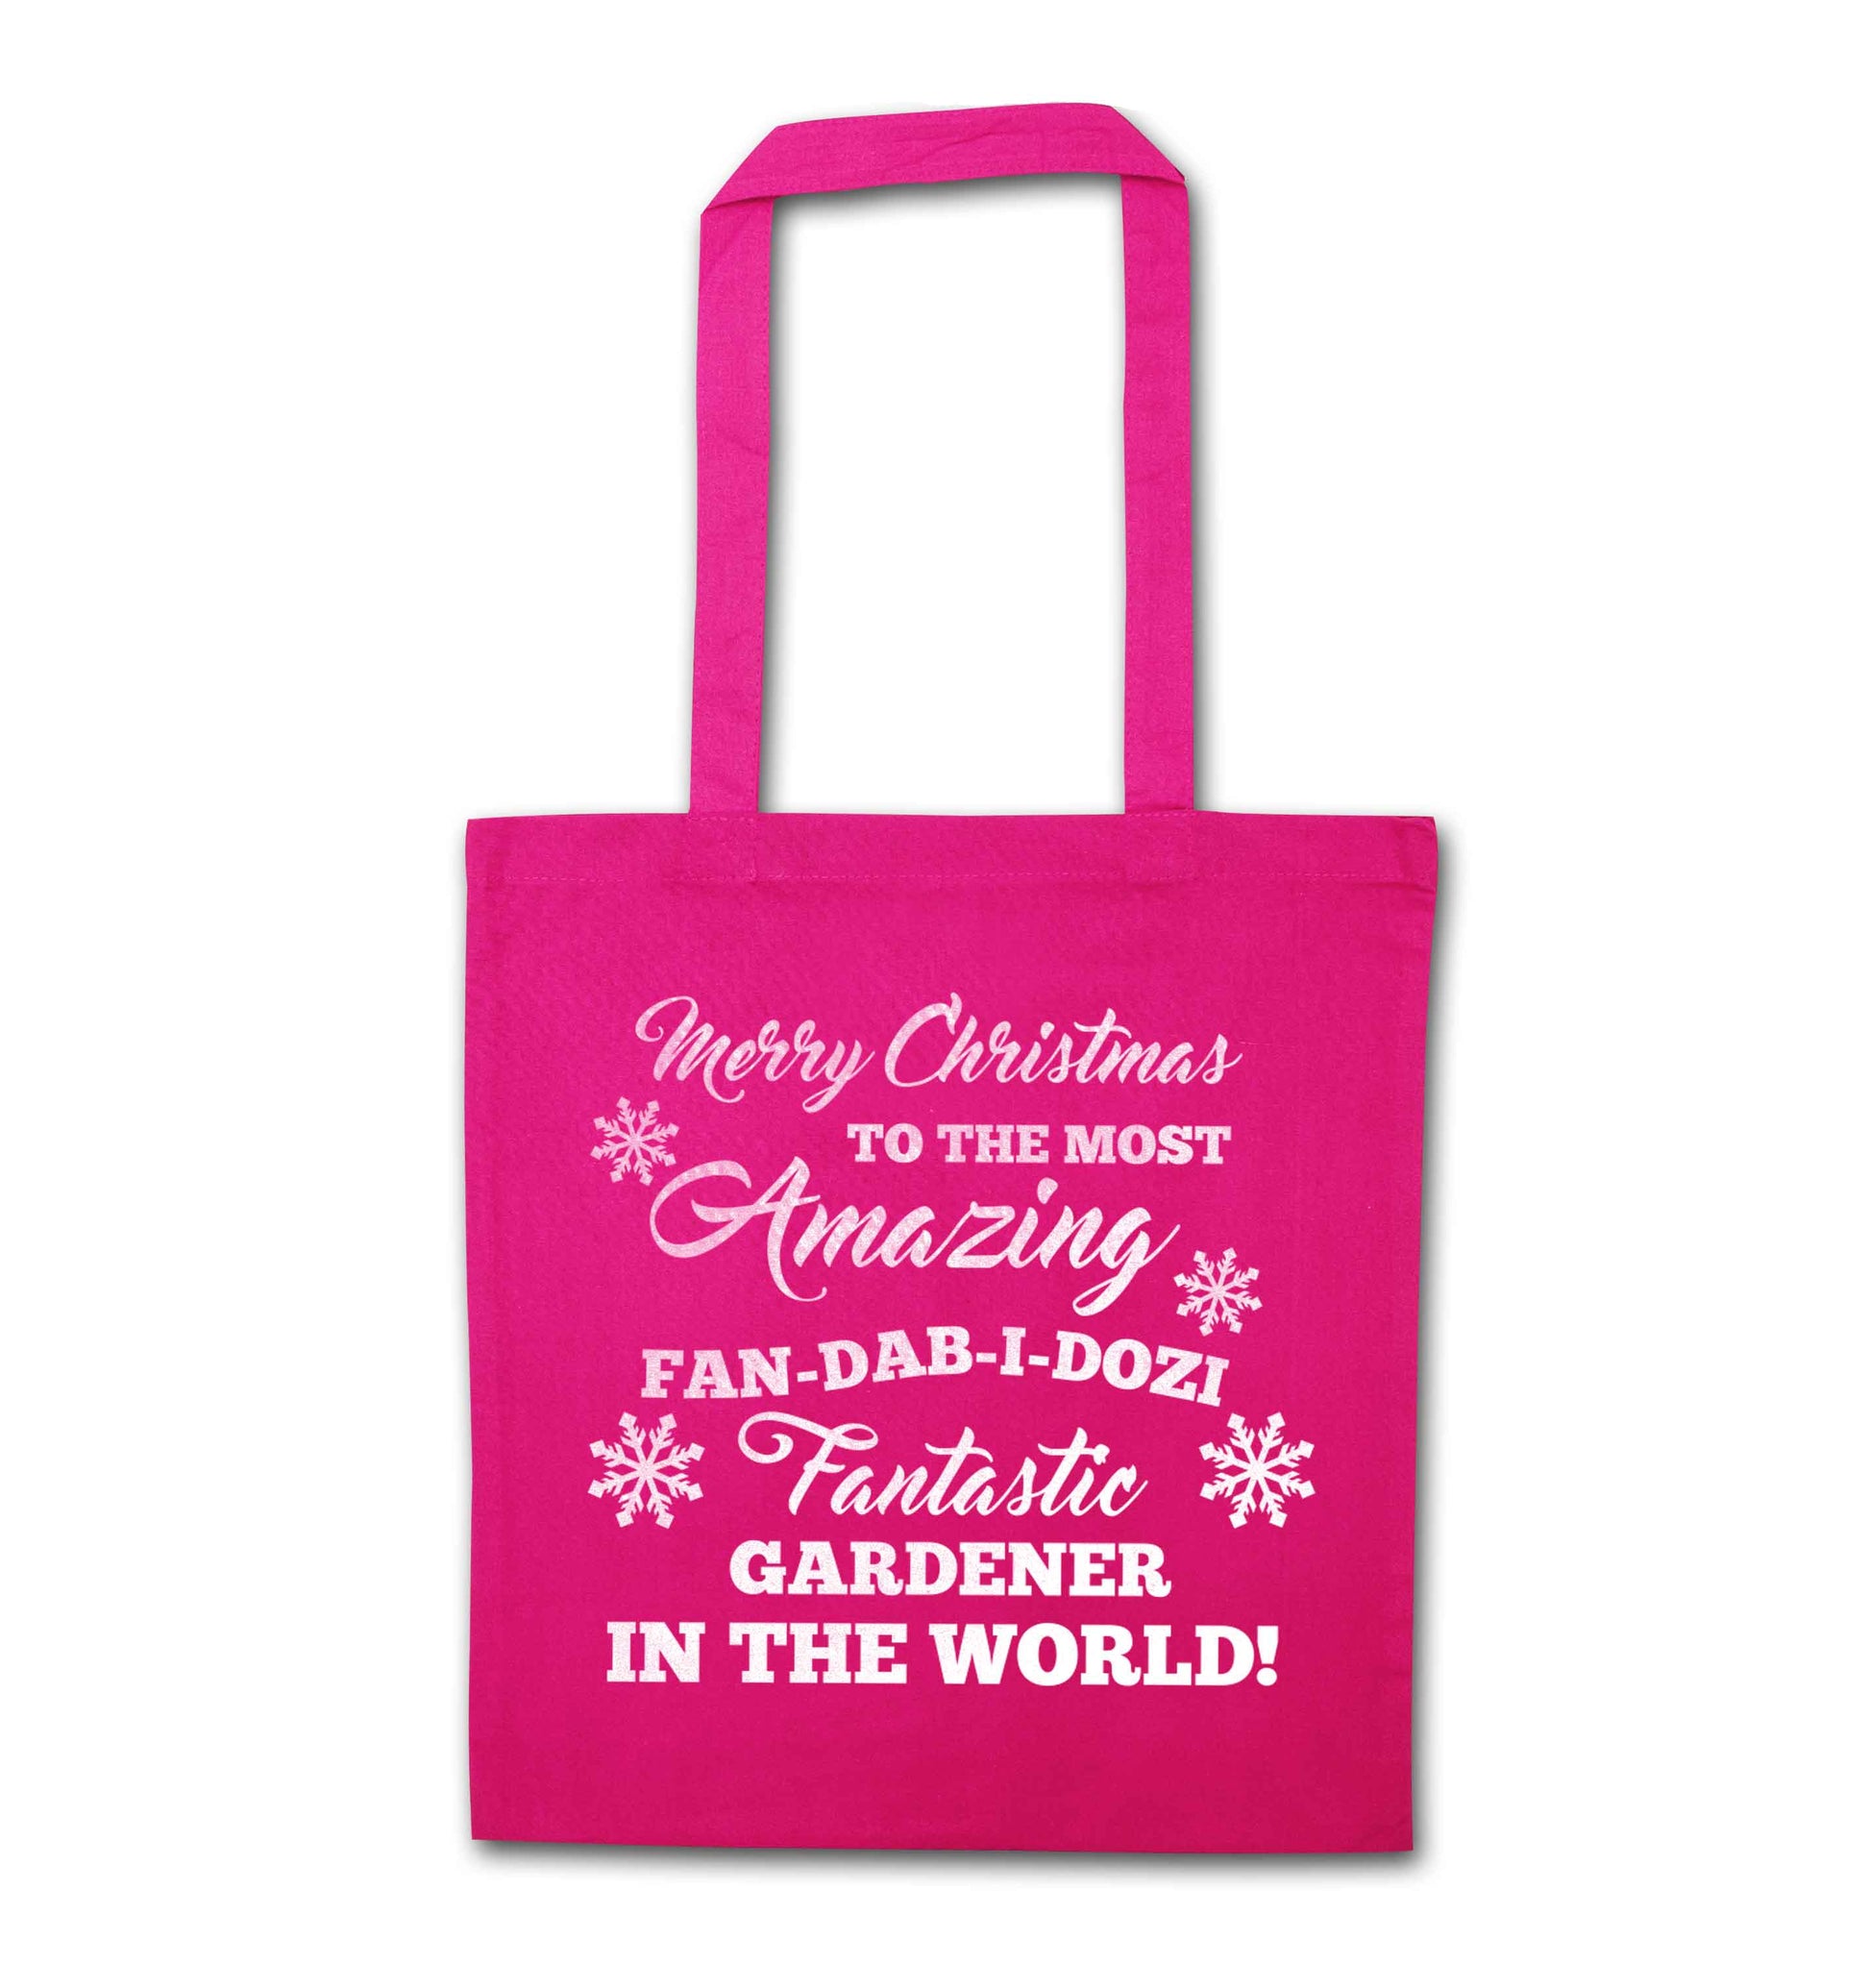 Merry Christmas to the most amazing gardener in the world! pink tote bag